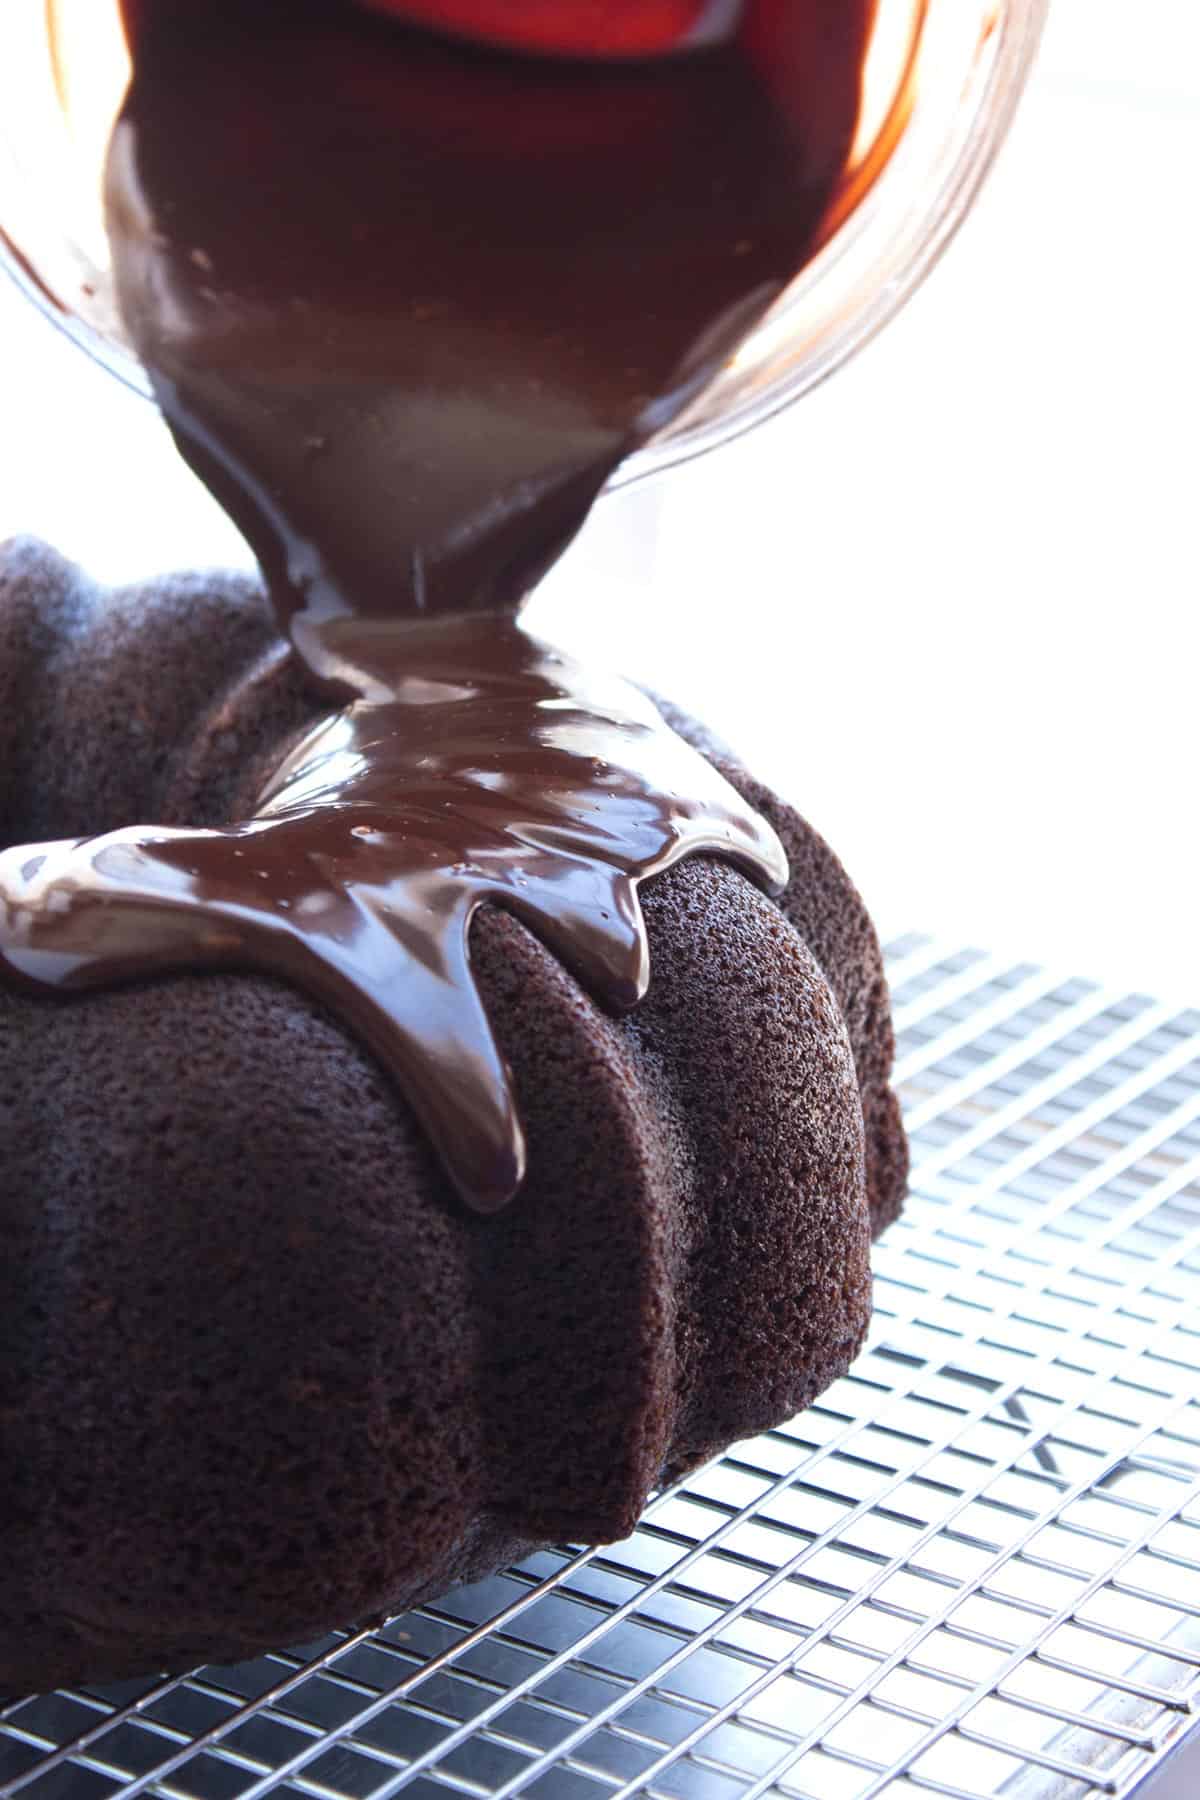 Pouring chocolate ganache out of a glass measuring cup onto a chocolate bundt cake.